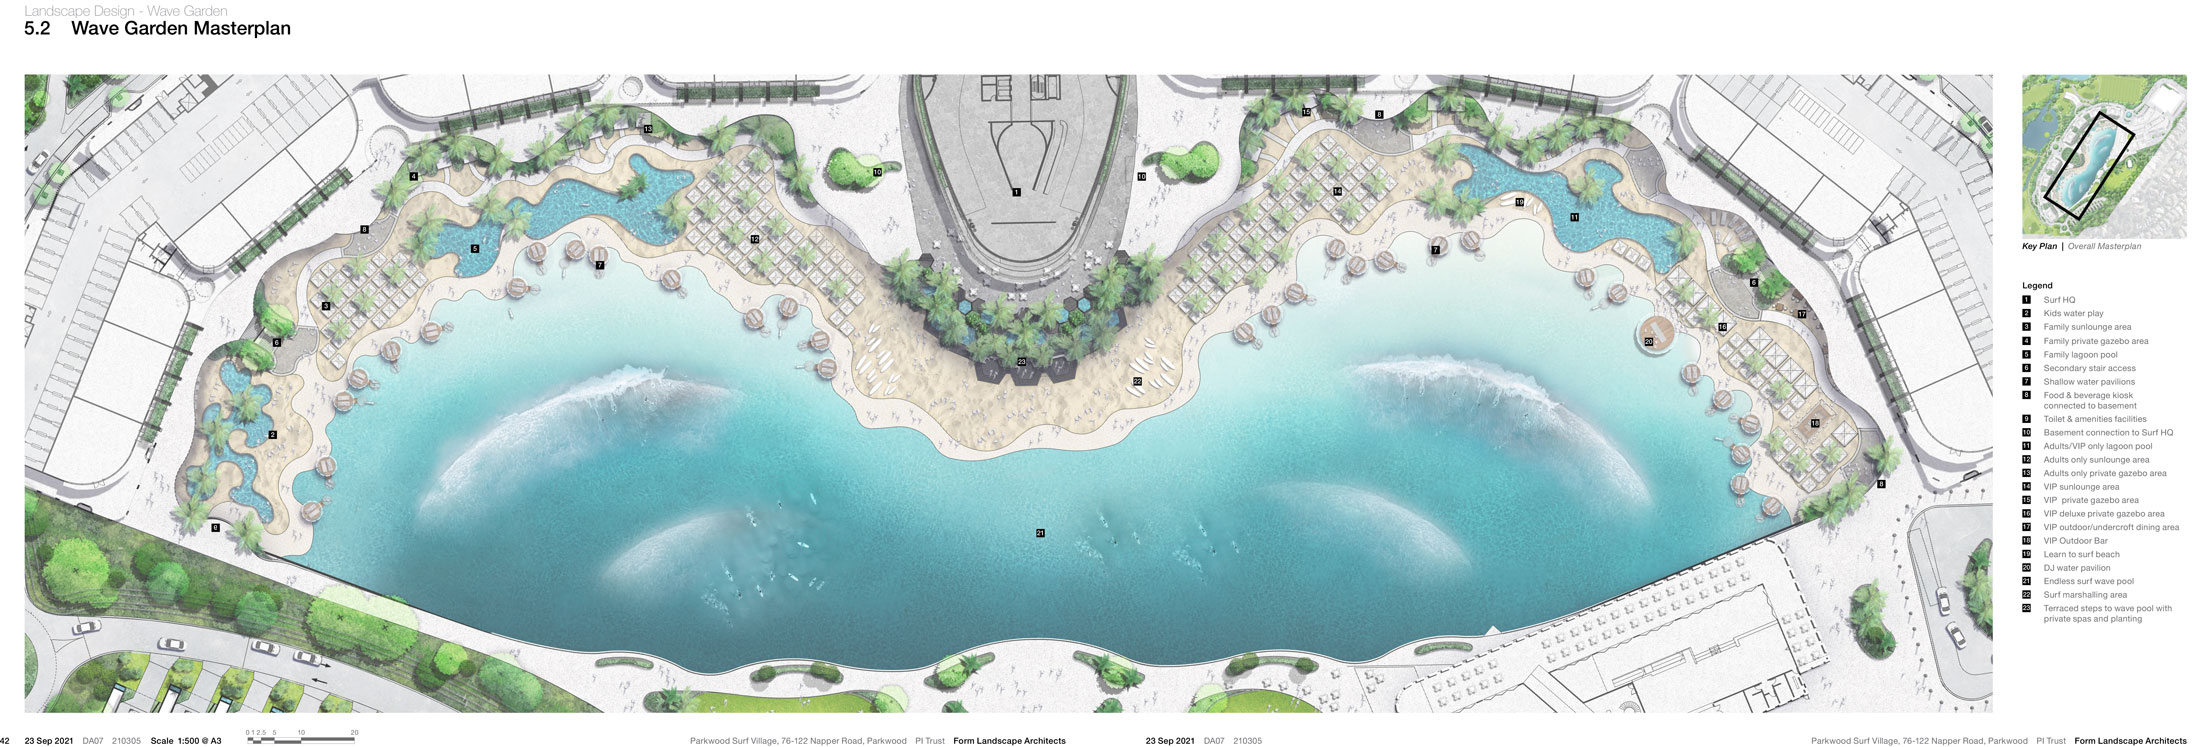 Masterplan of the proposed Wave Garden